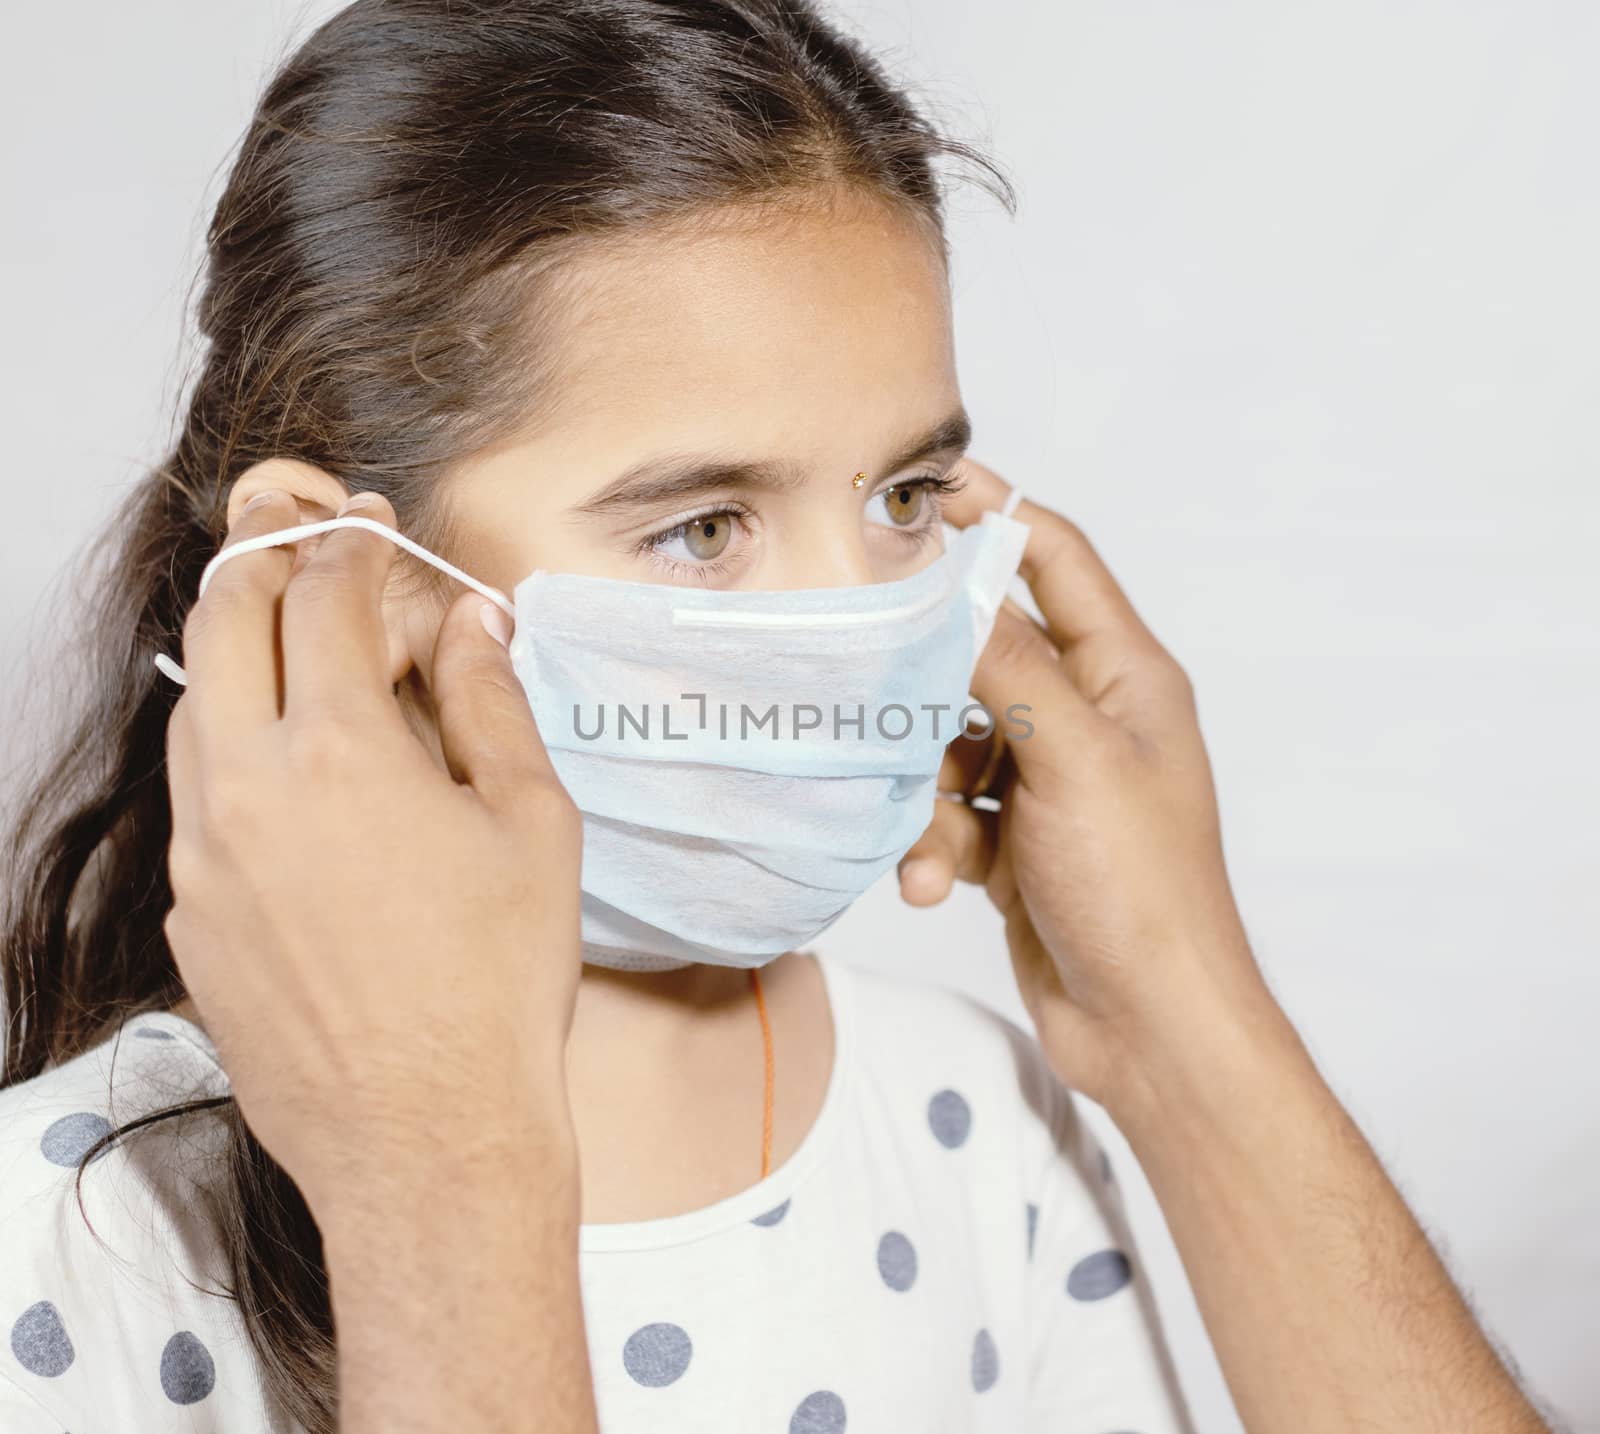 Prevention of spreading the coronavirus or COVID-19 outbreak by wearing mask - Father wearing a disposable hygienic face mask to his young girl daughter to protect spread of disease. by lakshmiprasad.maski@gmai.com